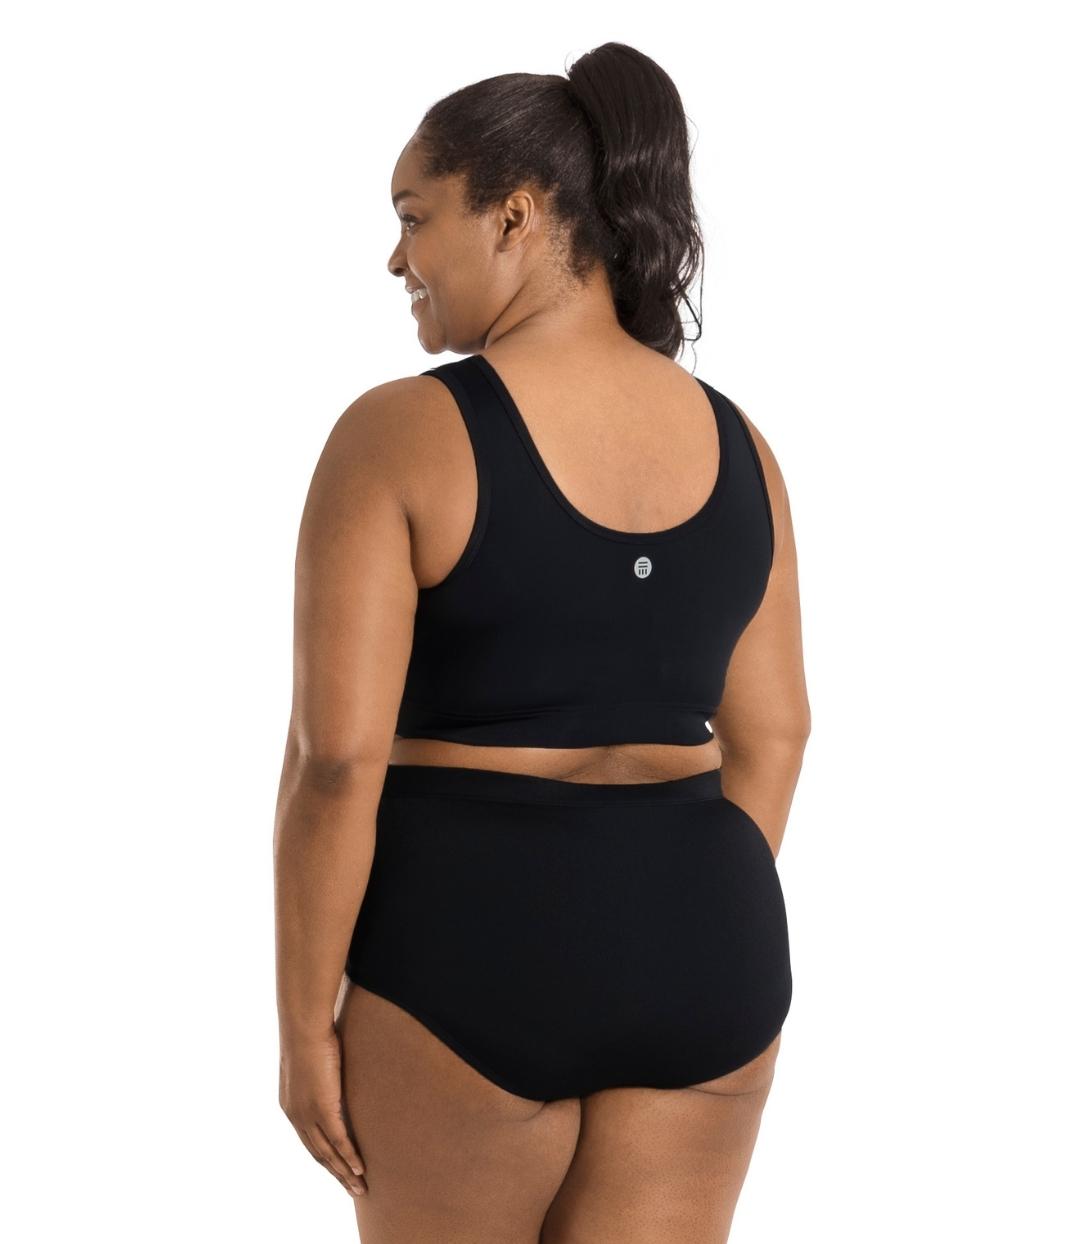 Plus size woman, back view, wearing QuikEnergy Swim Bra Black. Scoop back with elastic at the ribcage and JunoActive logo at center back.